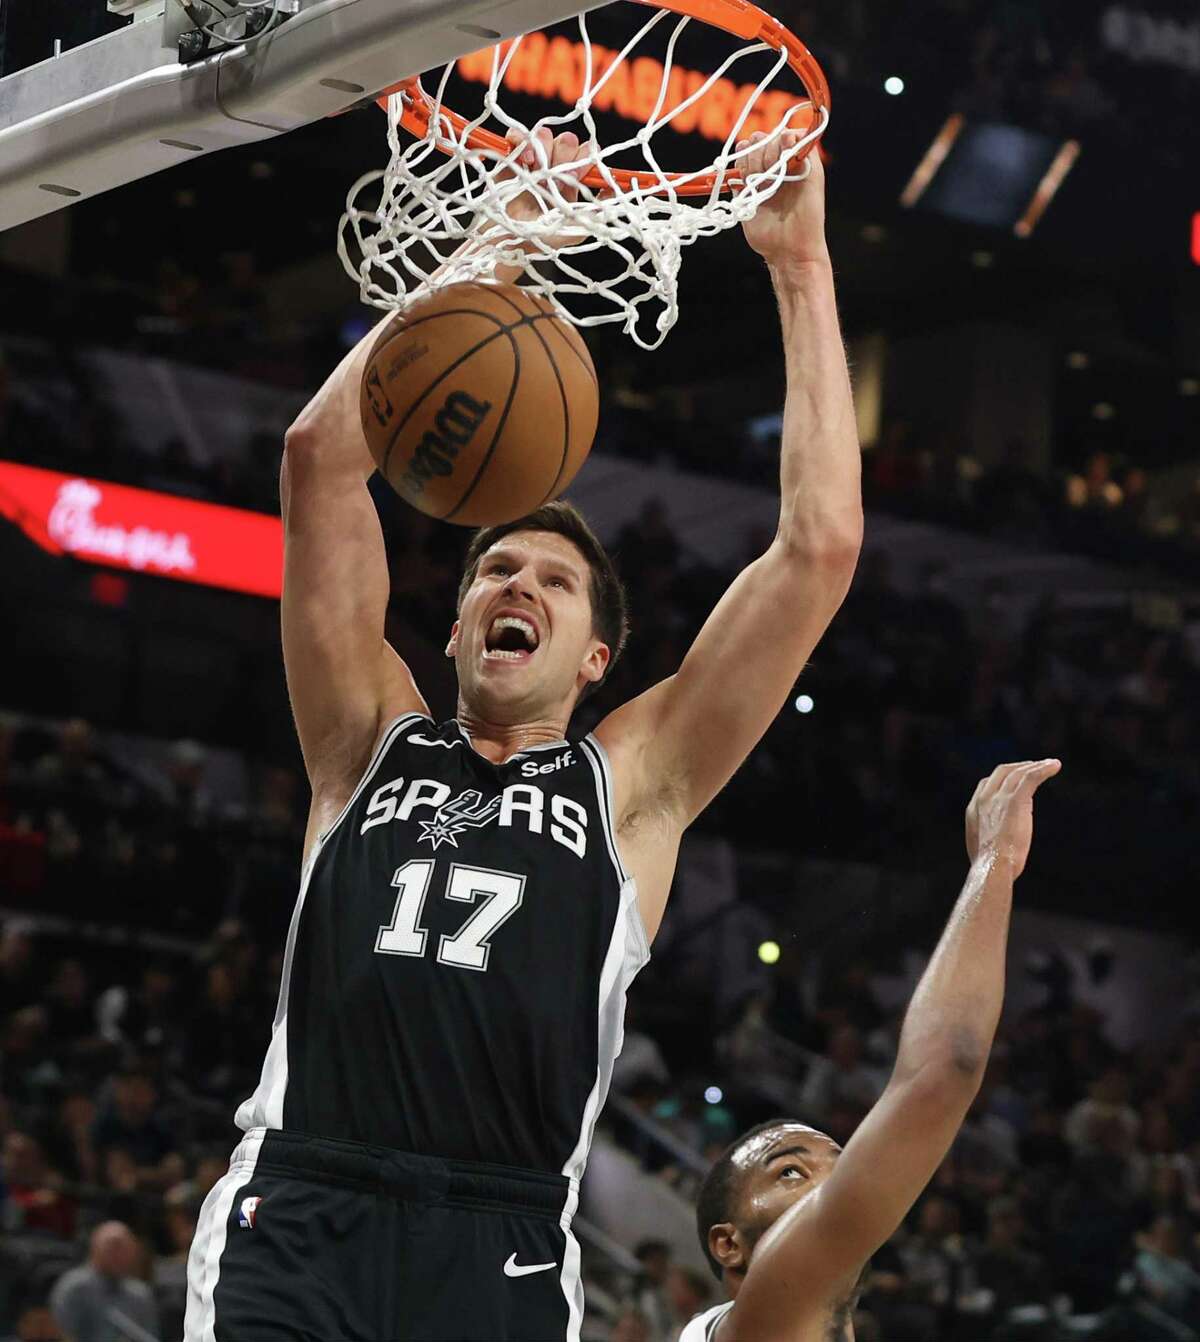 The Spurs’ Doug McDermott dunks on the Brooklyn Nets’ T.J. Warren during Tuesday’s game at the AT&T Center.